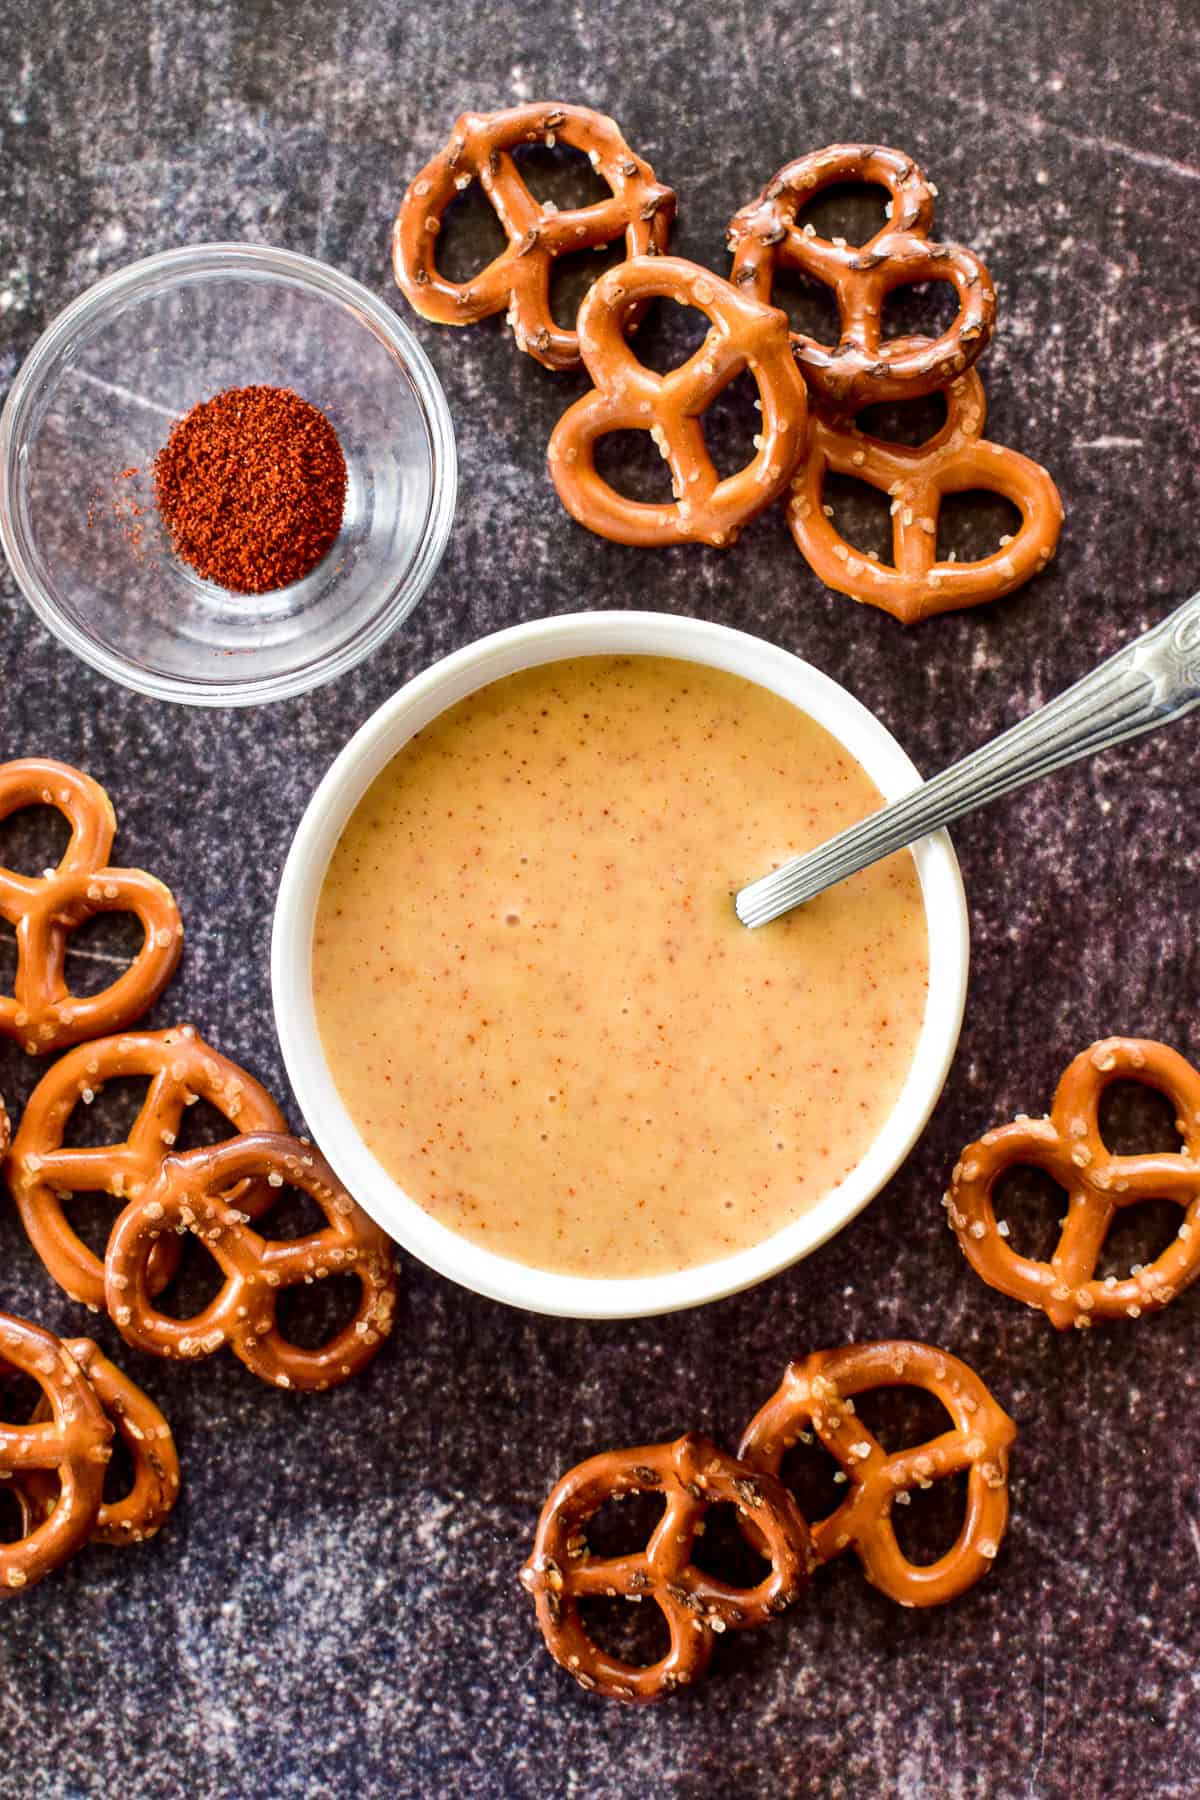 Spicy Honey Mustard in a bowl with pretzels